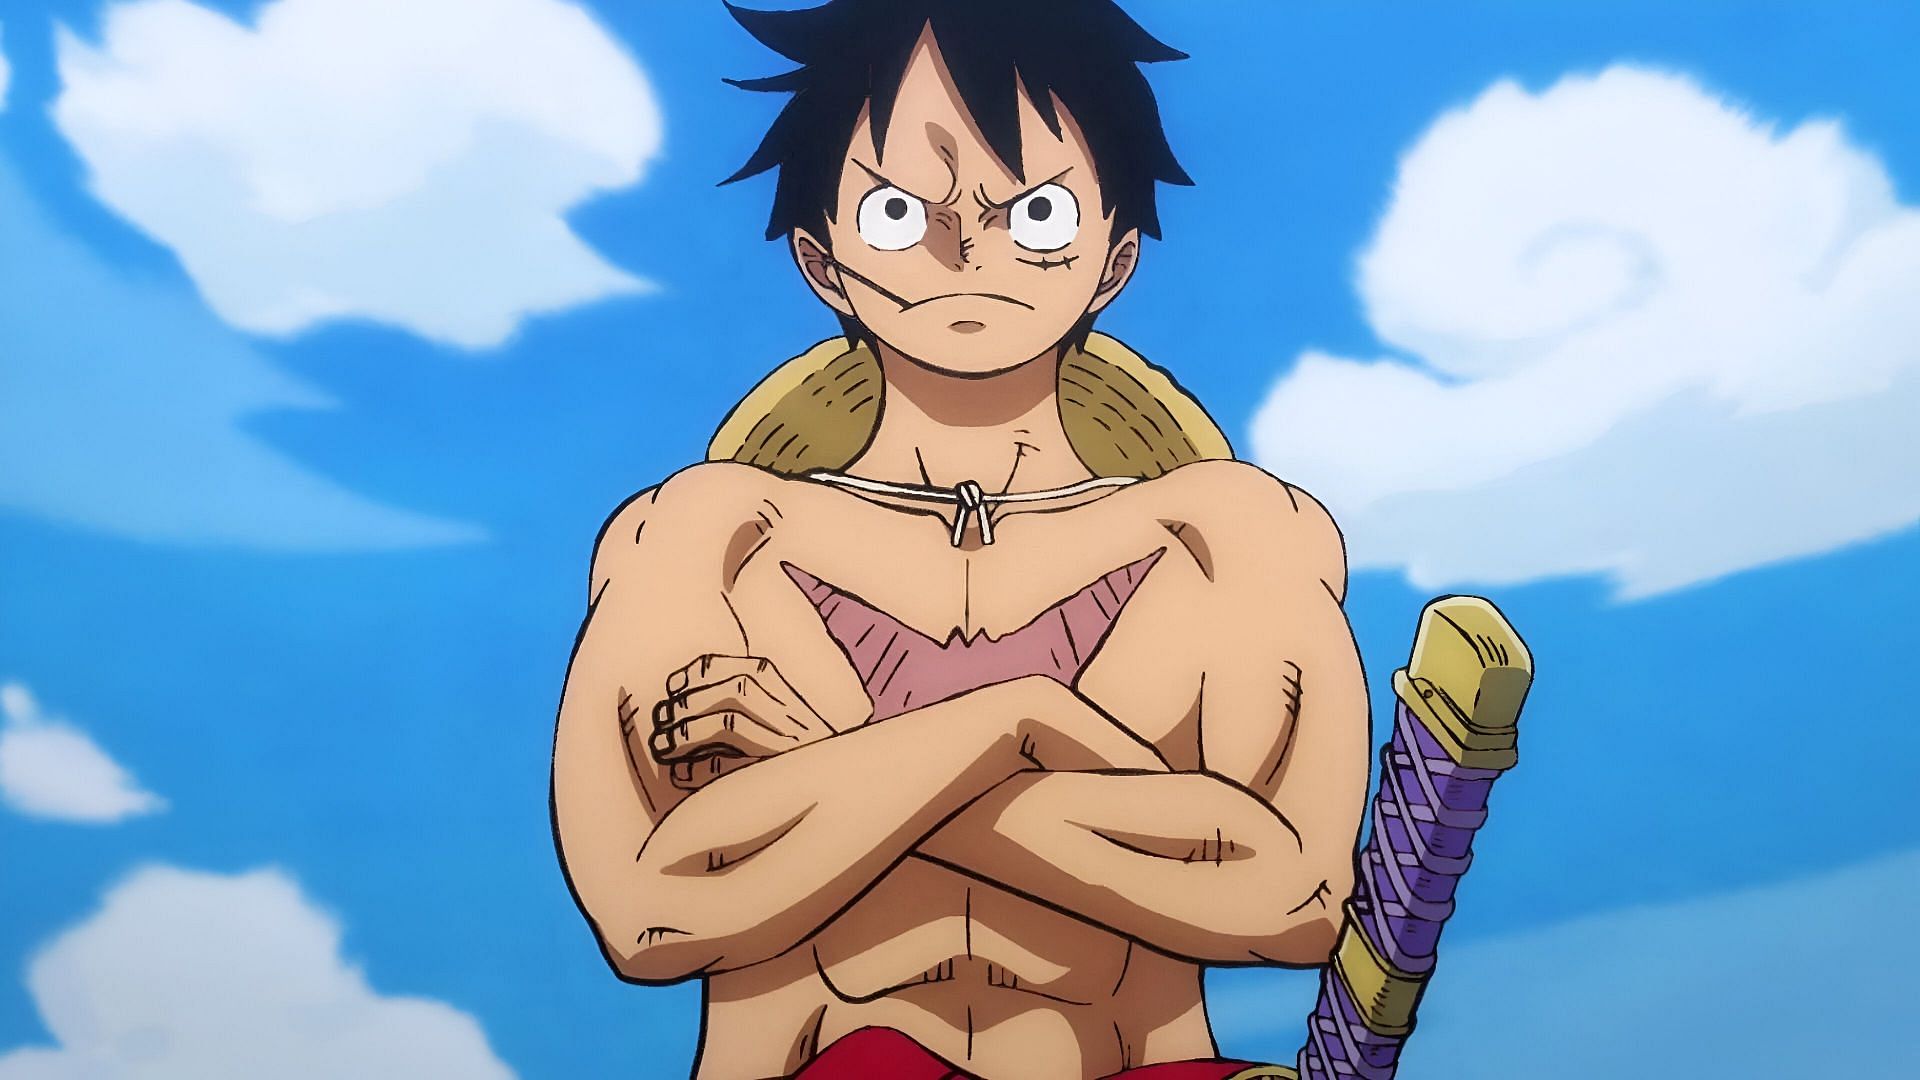 Monkey D Luffy as seen in the anime (Image via Toei Animation)